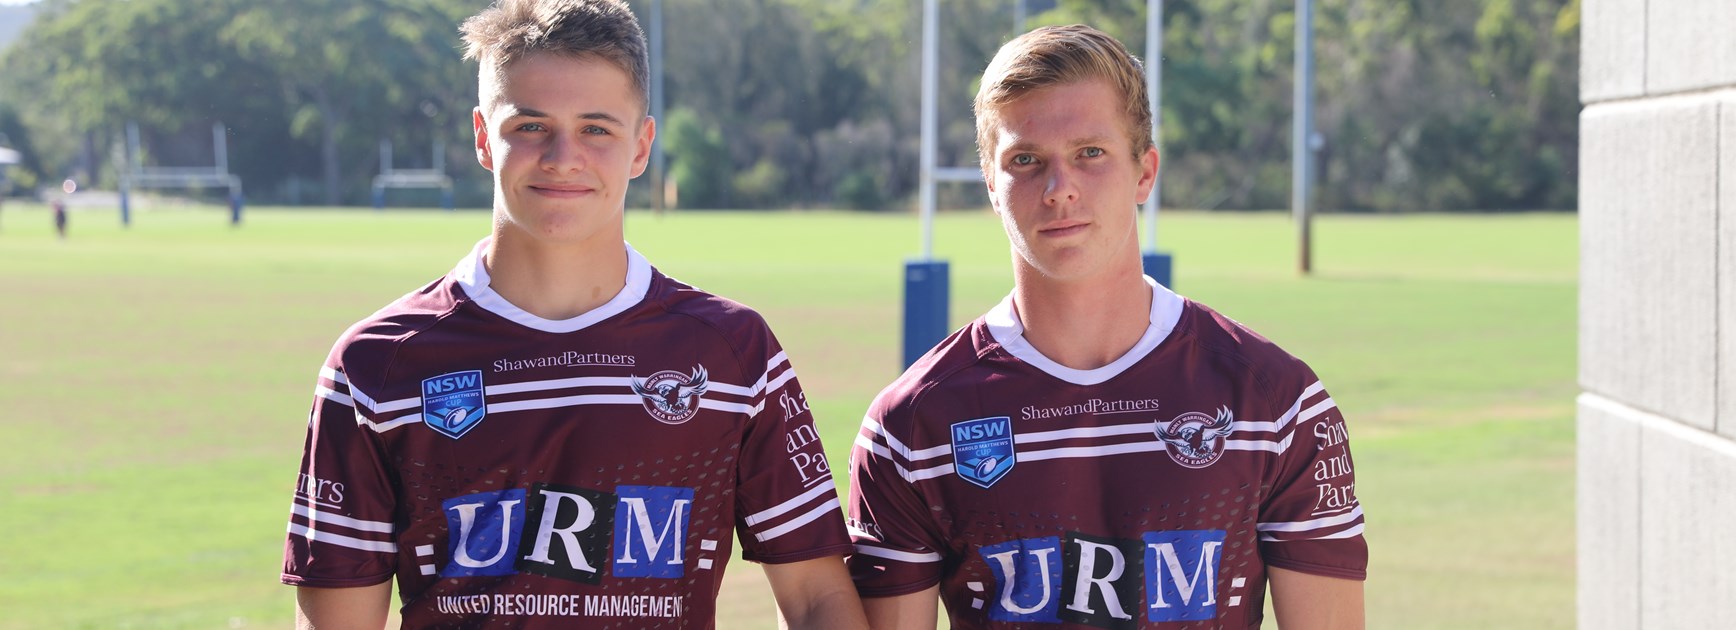 Record number of Manly players in NSW Junior Blues